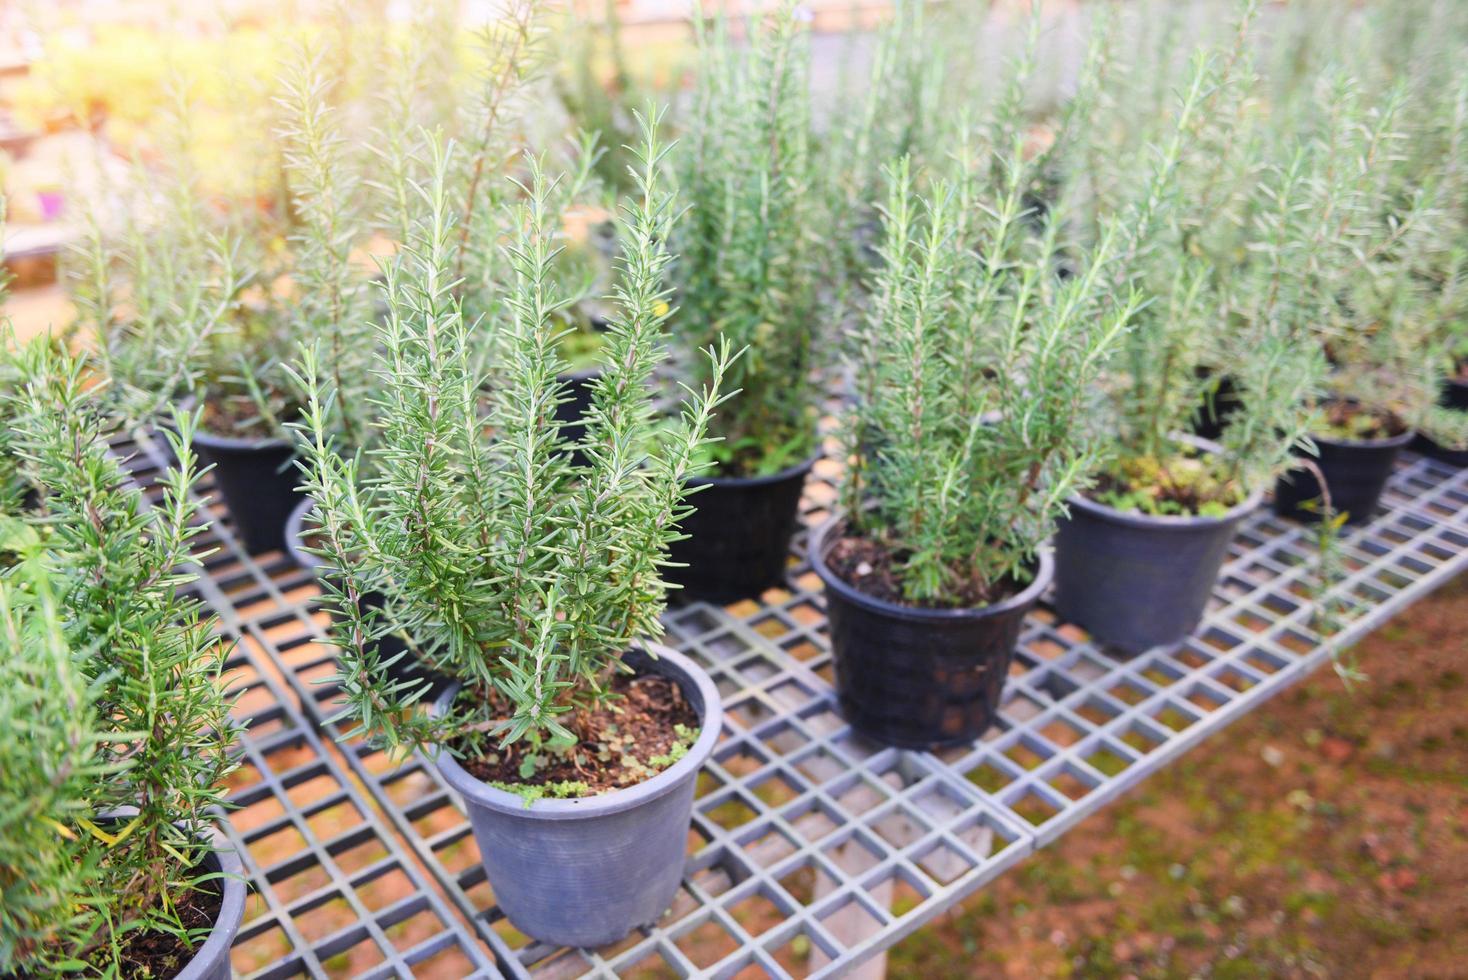 Rosemary plant growing in the garden for extracts essential oil - Fresh rosemary nature herbs in the nursery greenhouse background photo